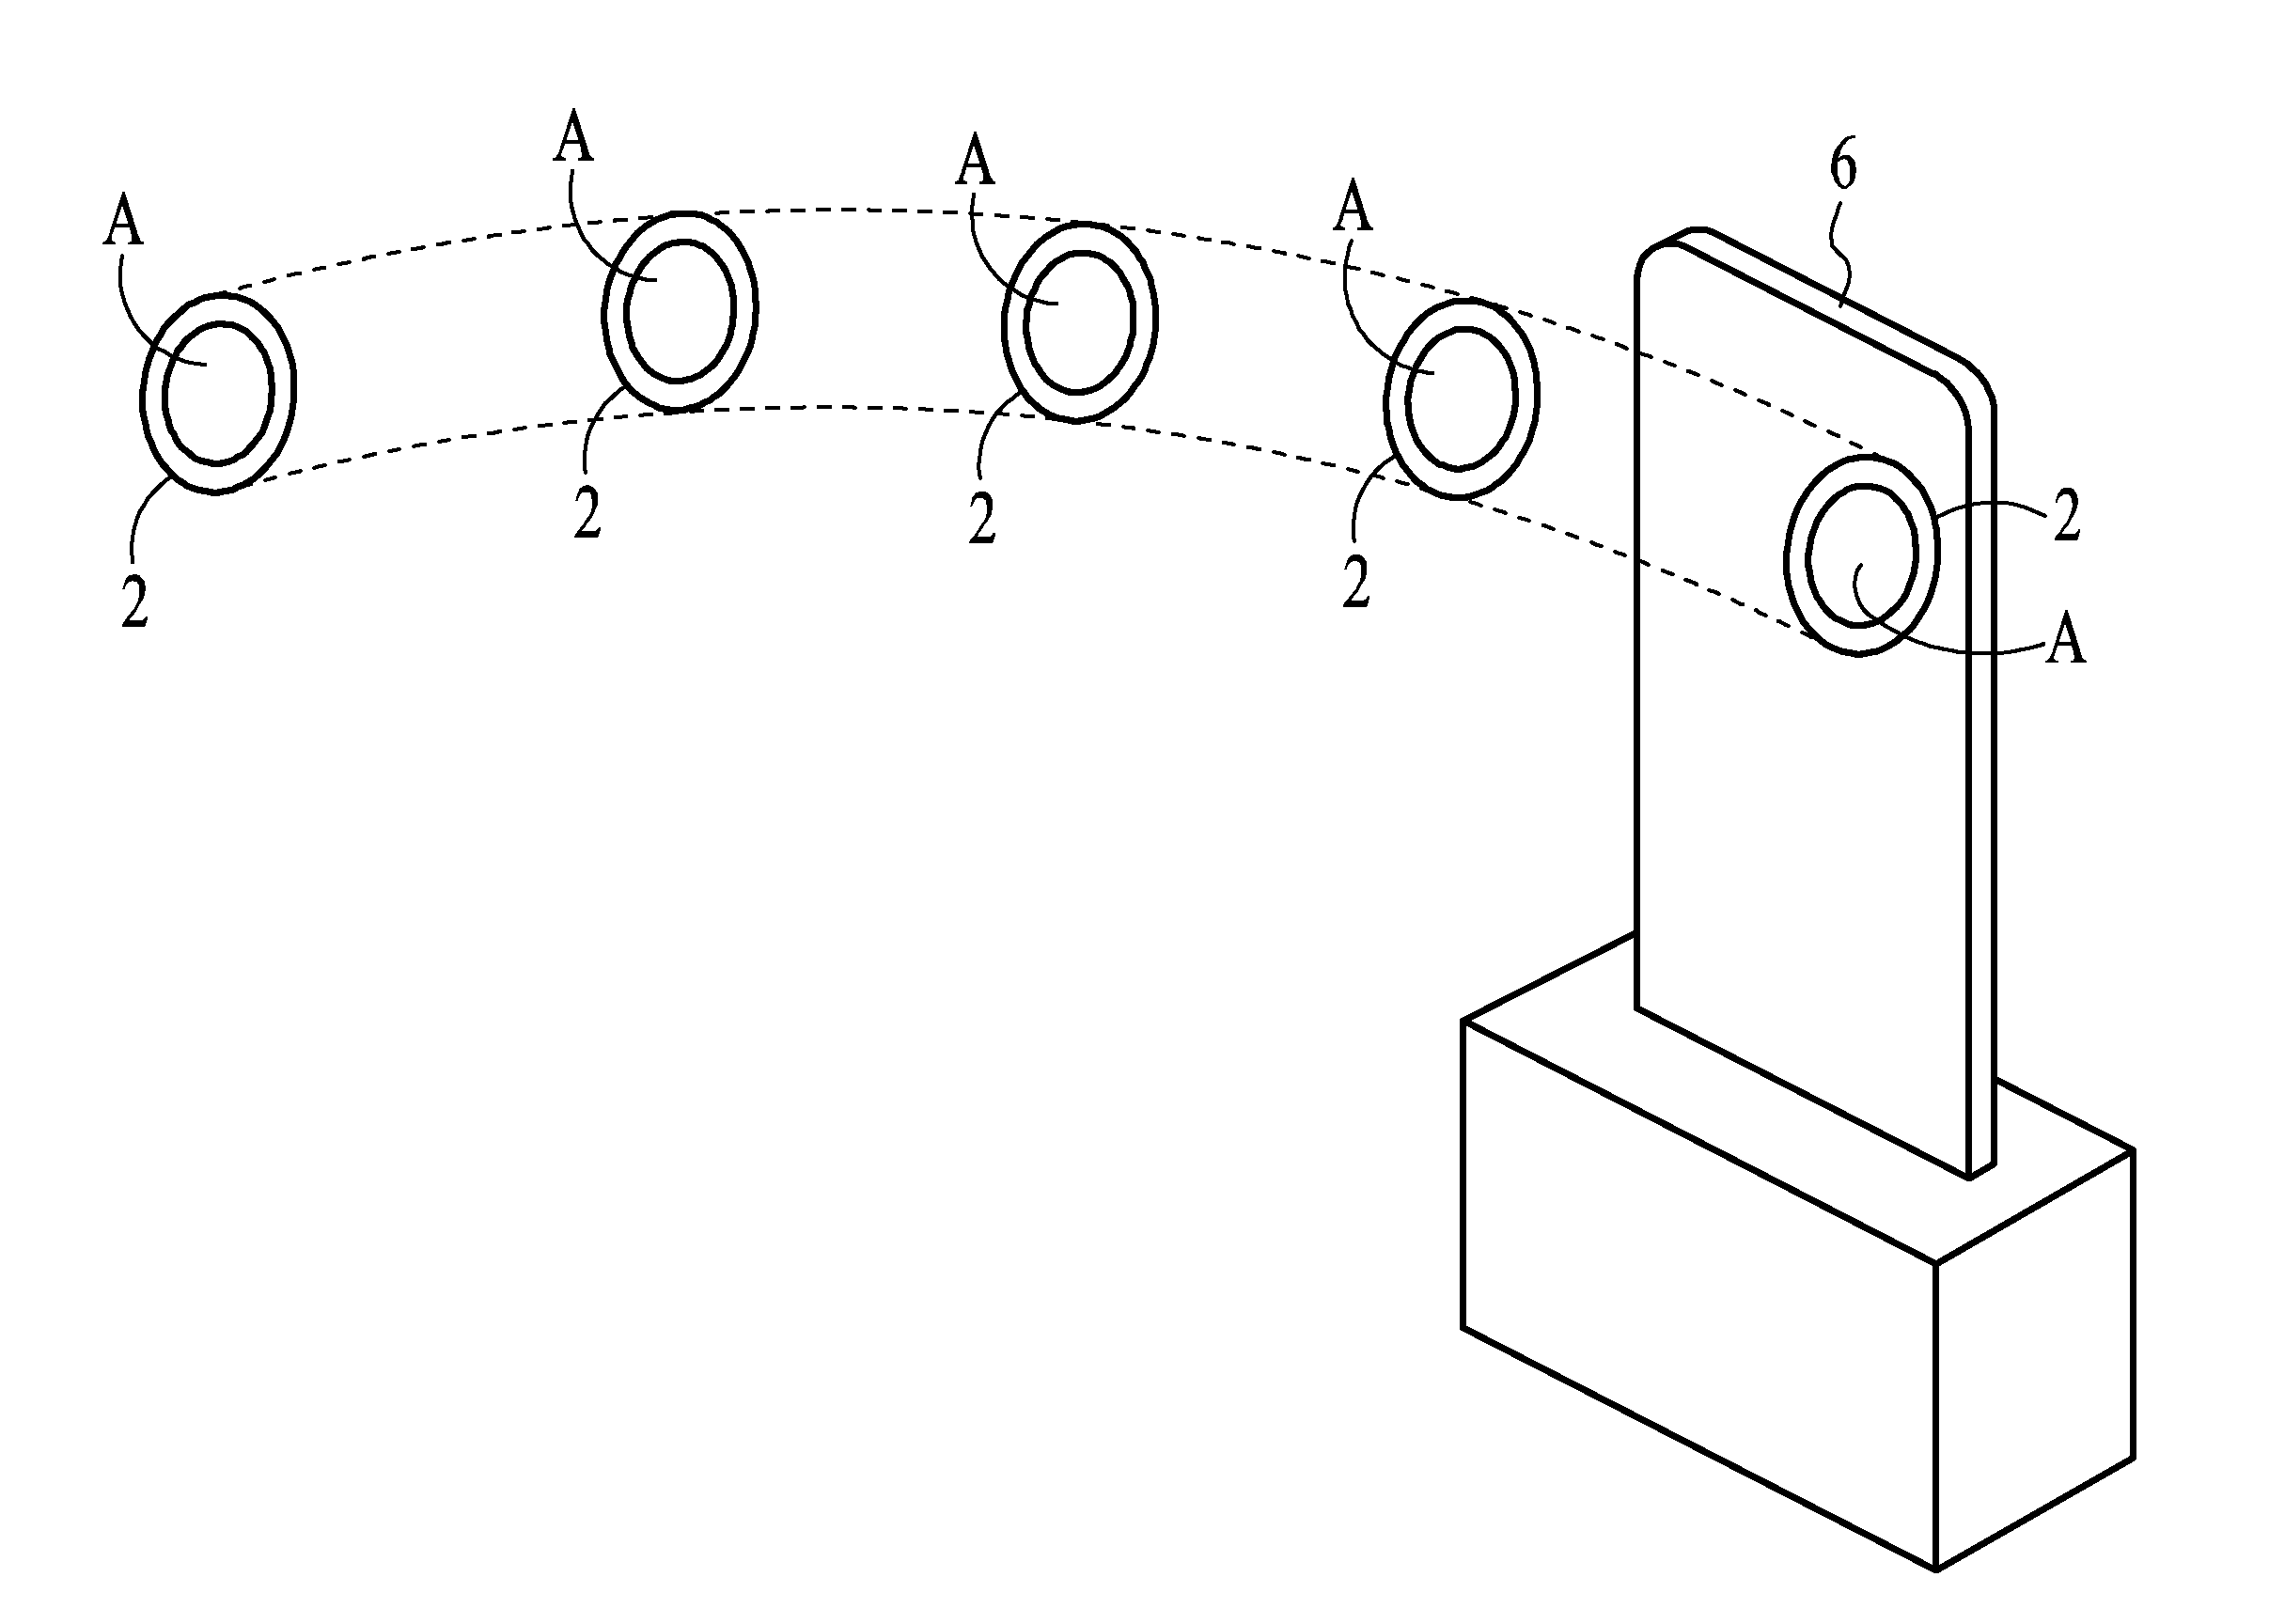 Method and system for magnetic toss gaming